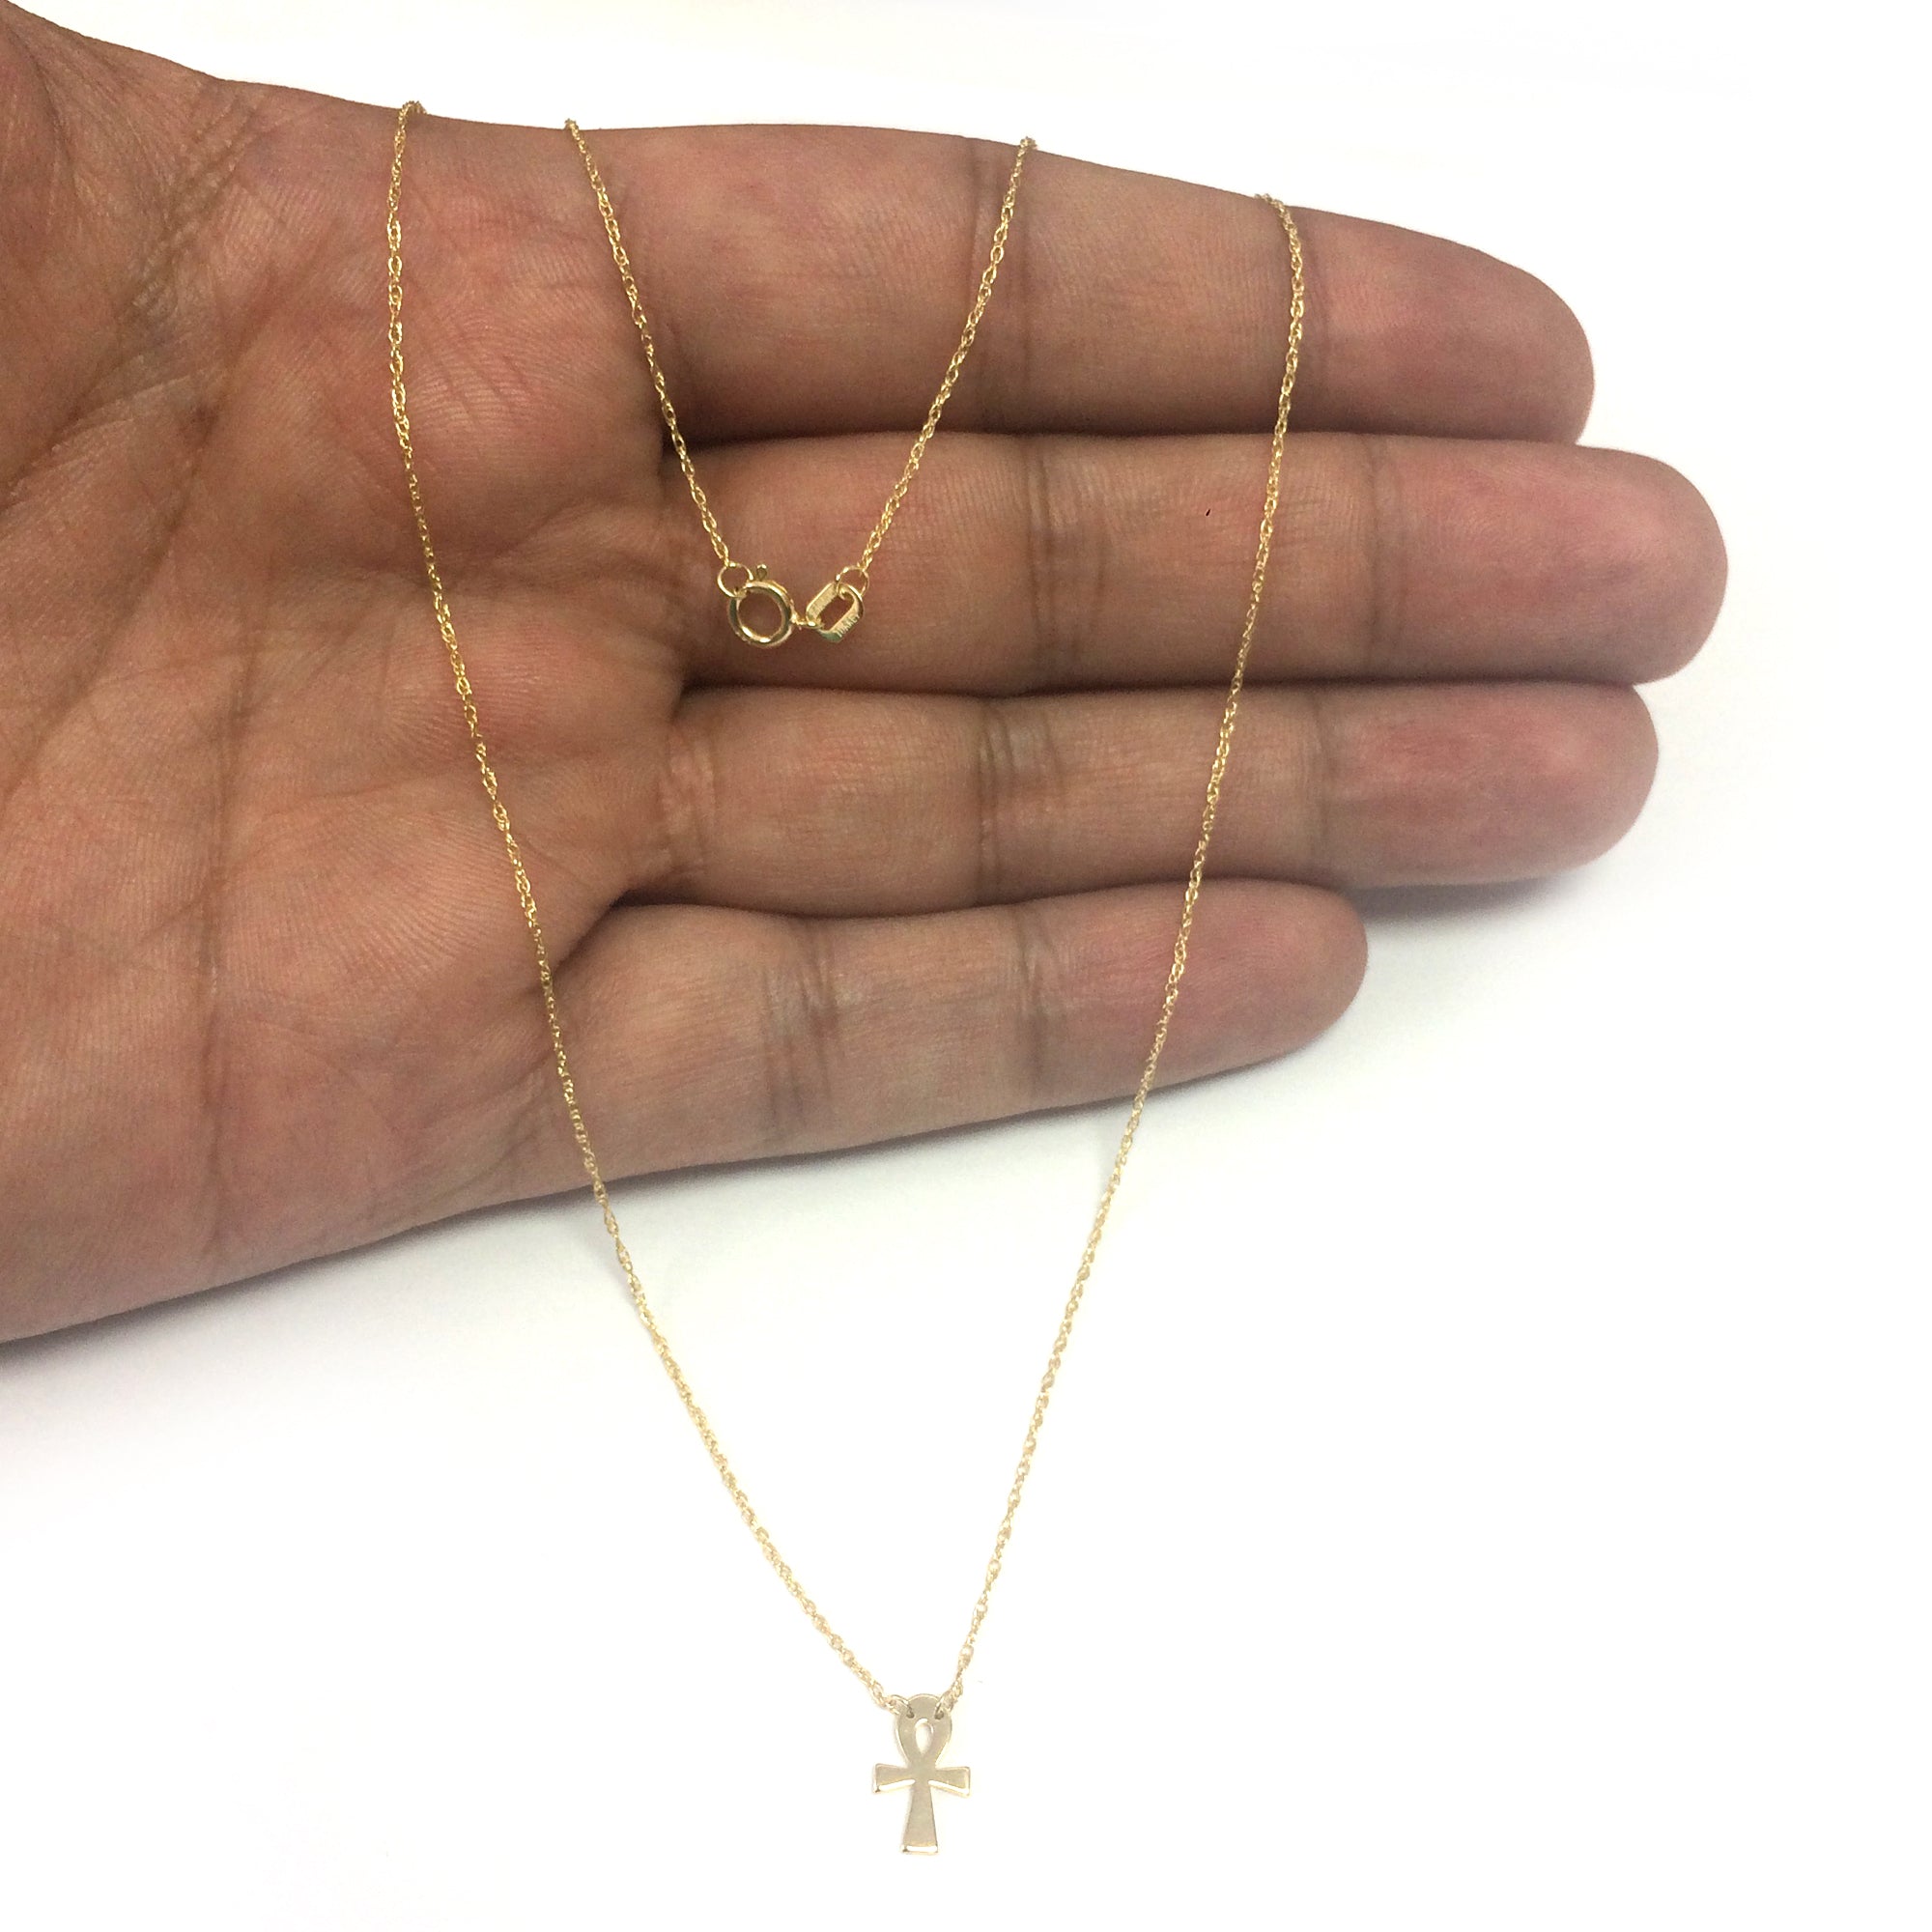 14K Yellow Gold Mini Ankh Cross Pendant Necklace, 16" To 18" Adjustable fine designer jewelry for men and women